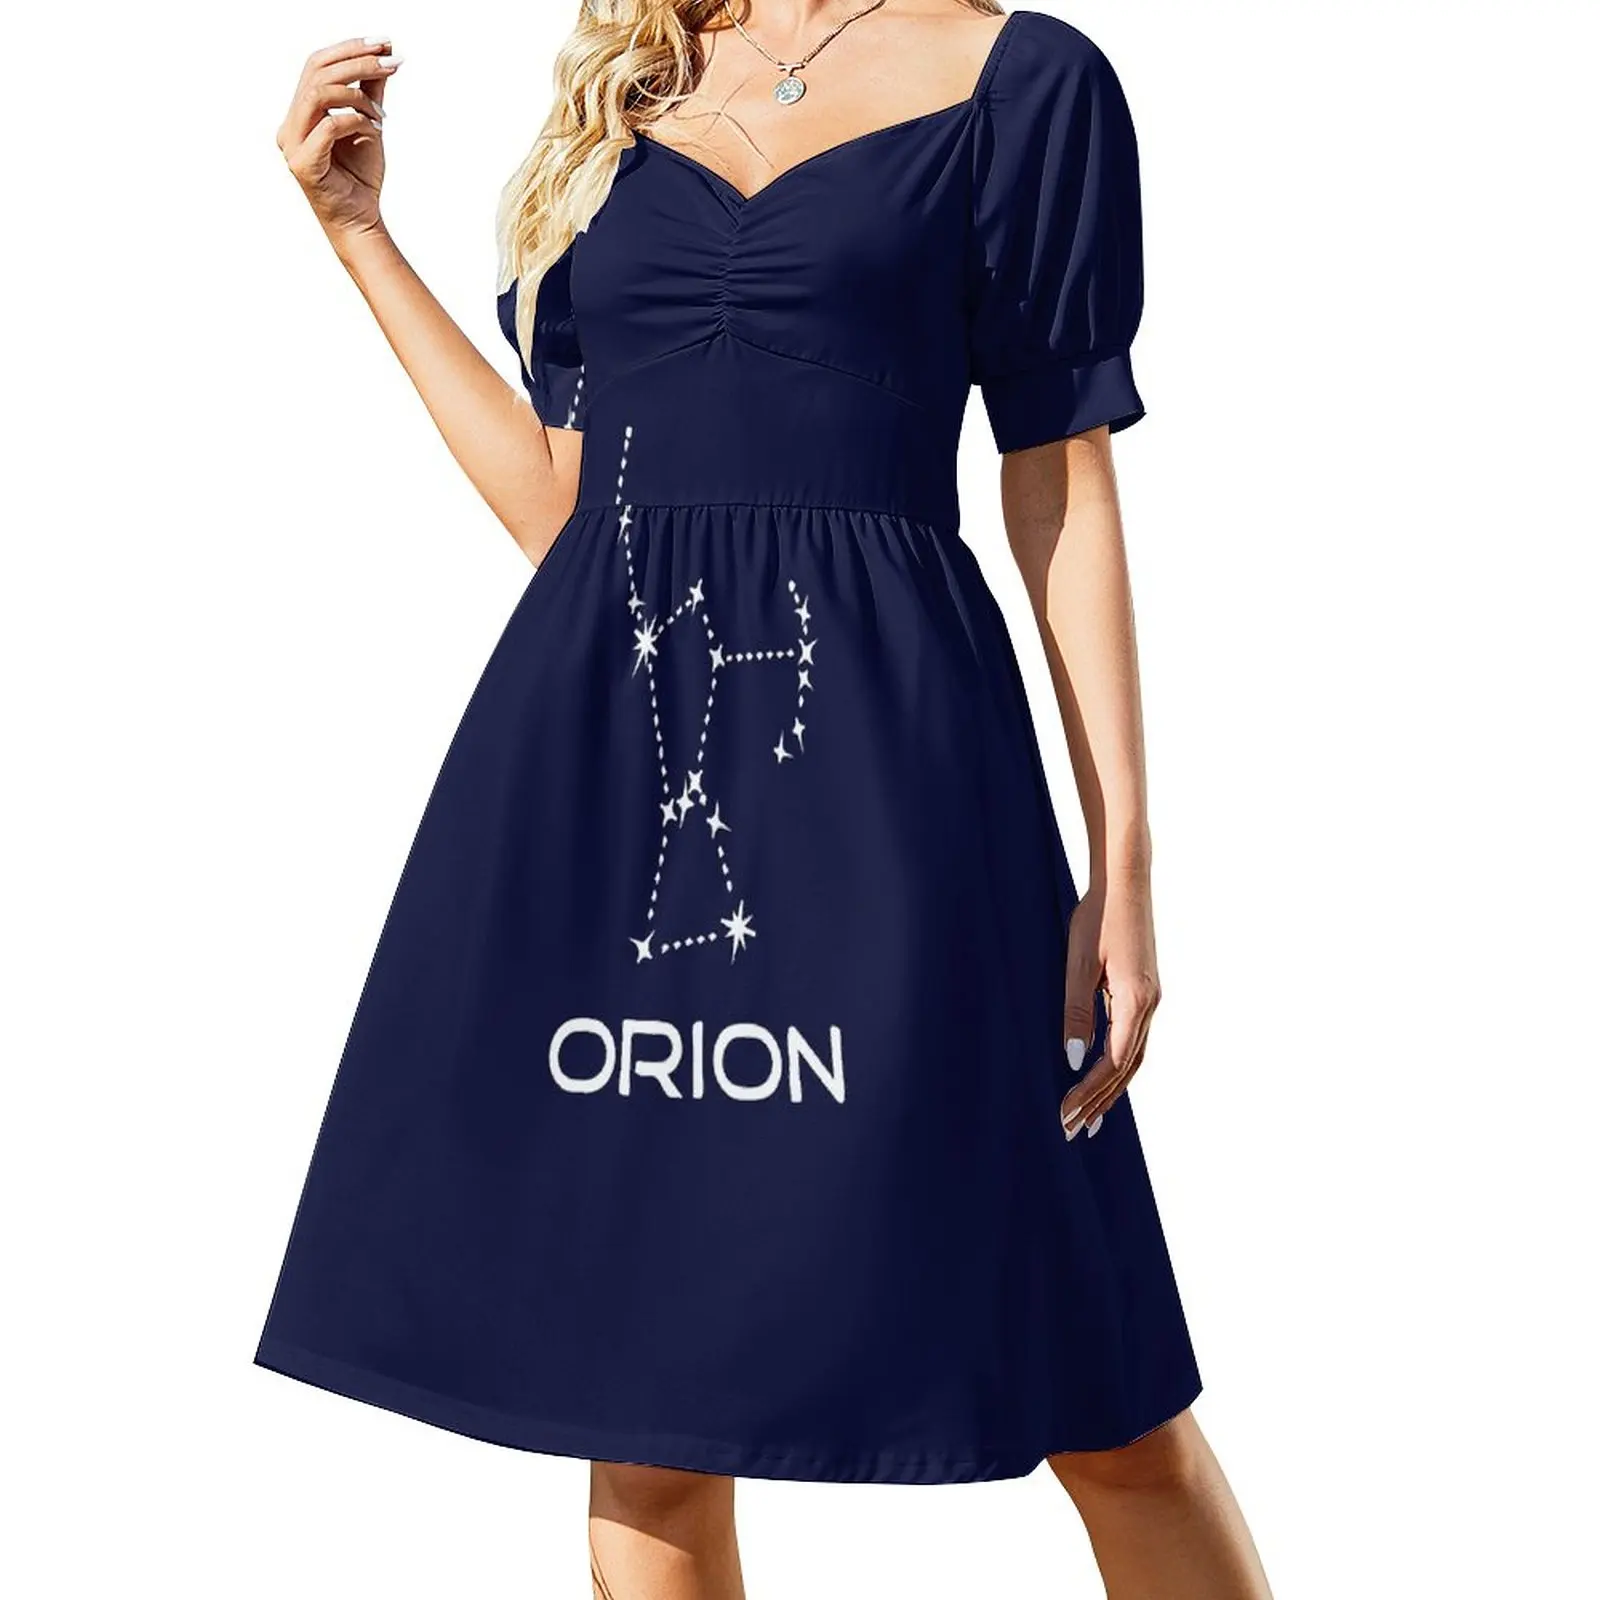 

Orion-constellation Dress beach outfits for women party dress women elegant luxury clothing women summer 2023